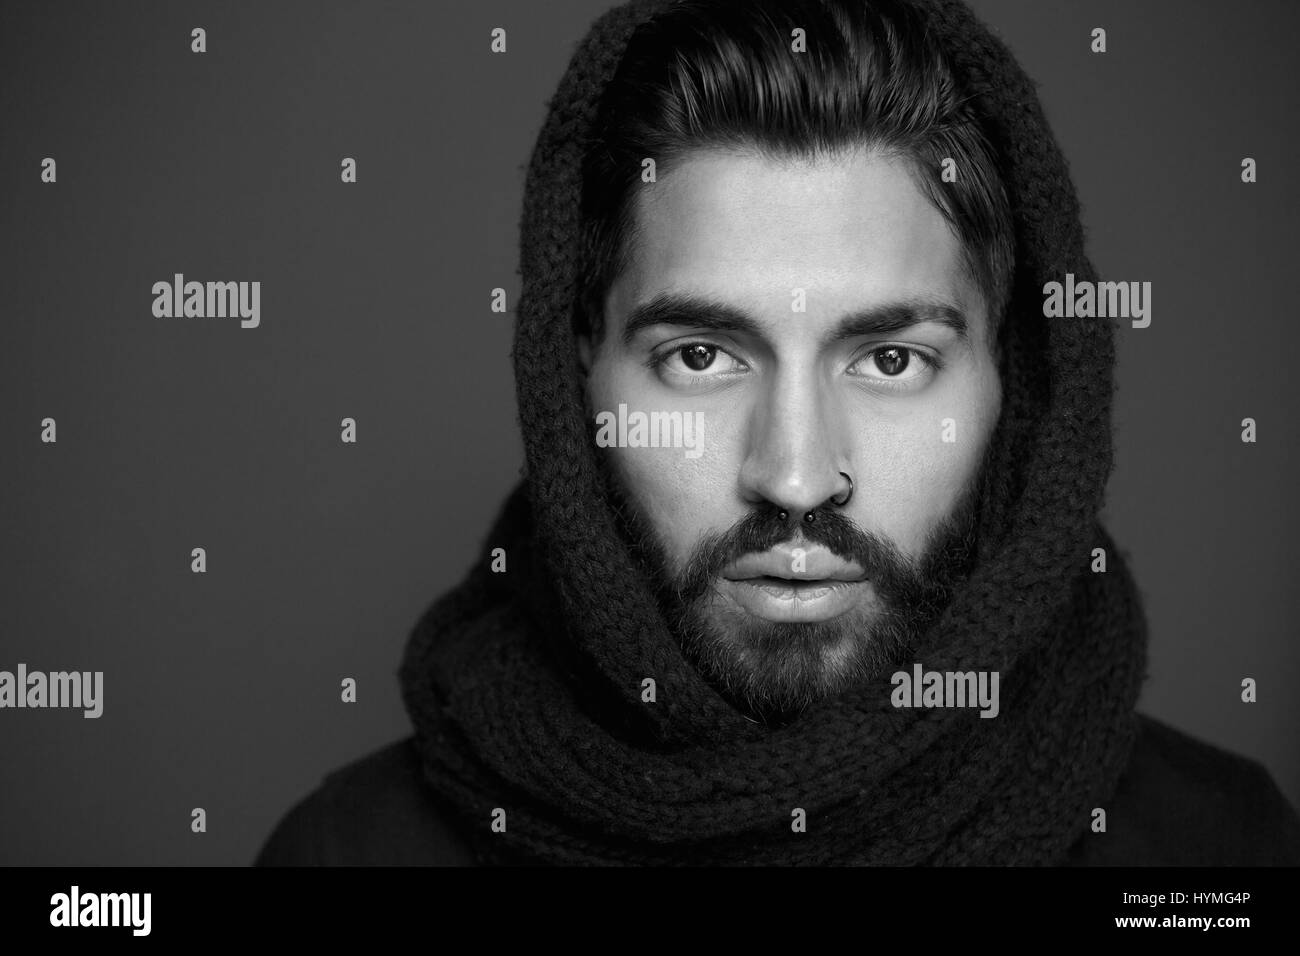 Close up black and white portrait of a man with wool scarf Stock Photo